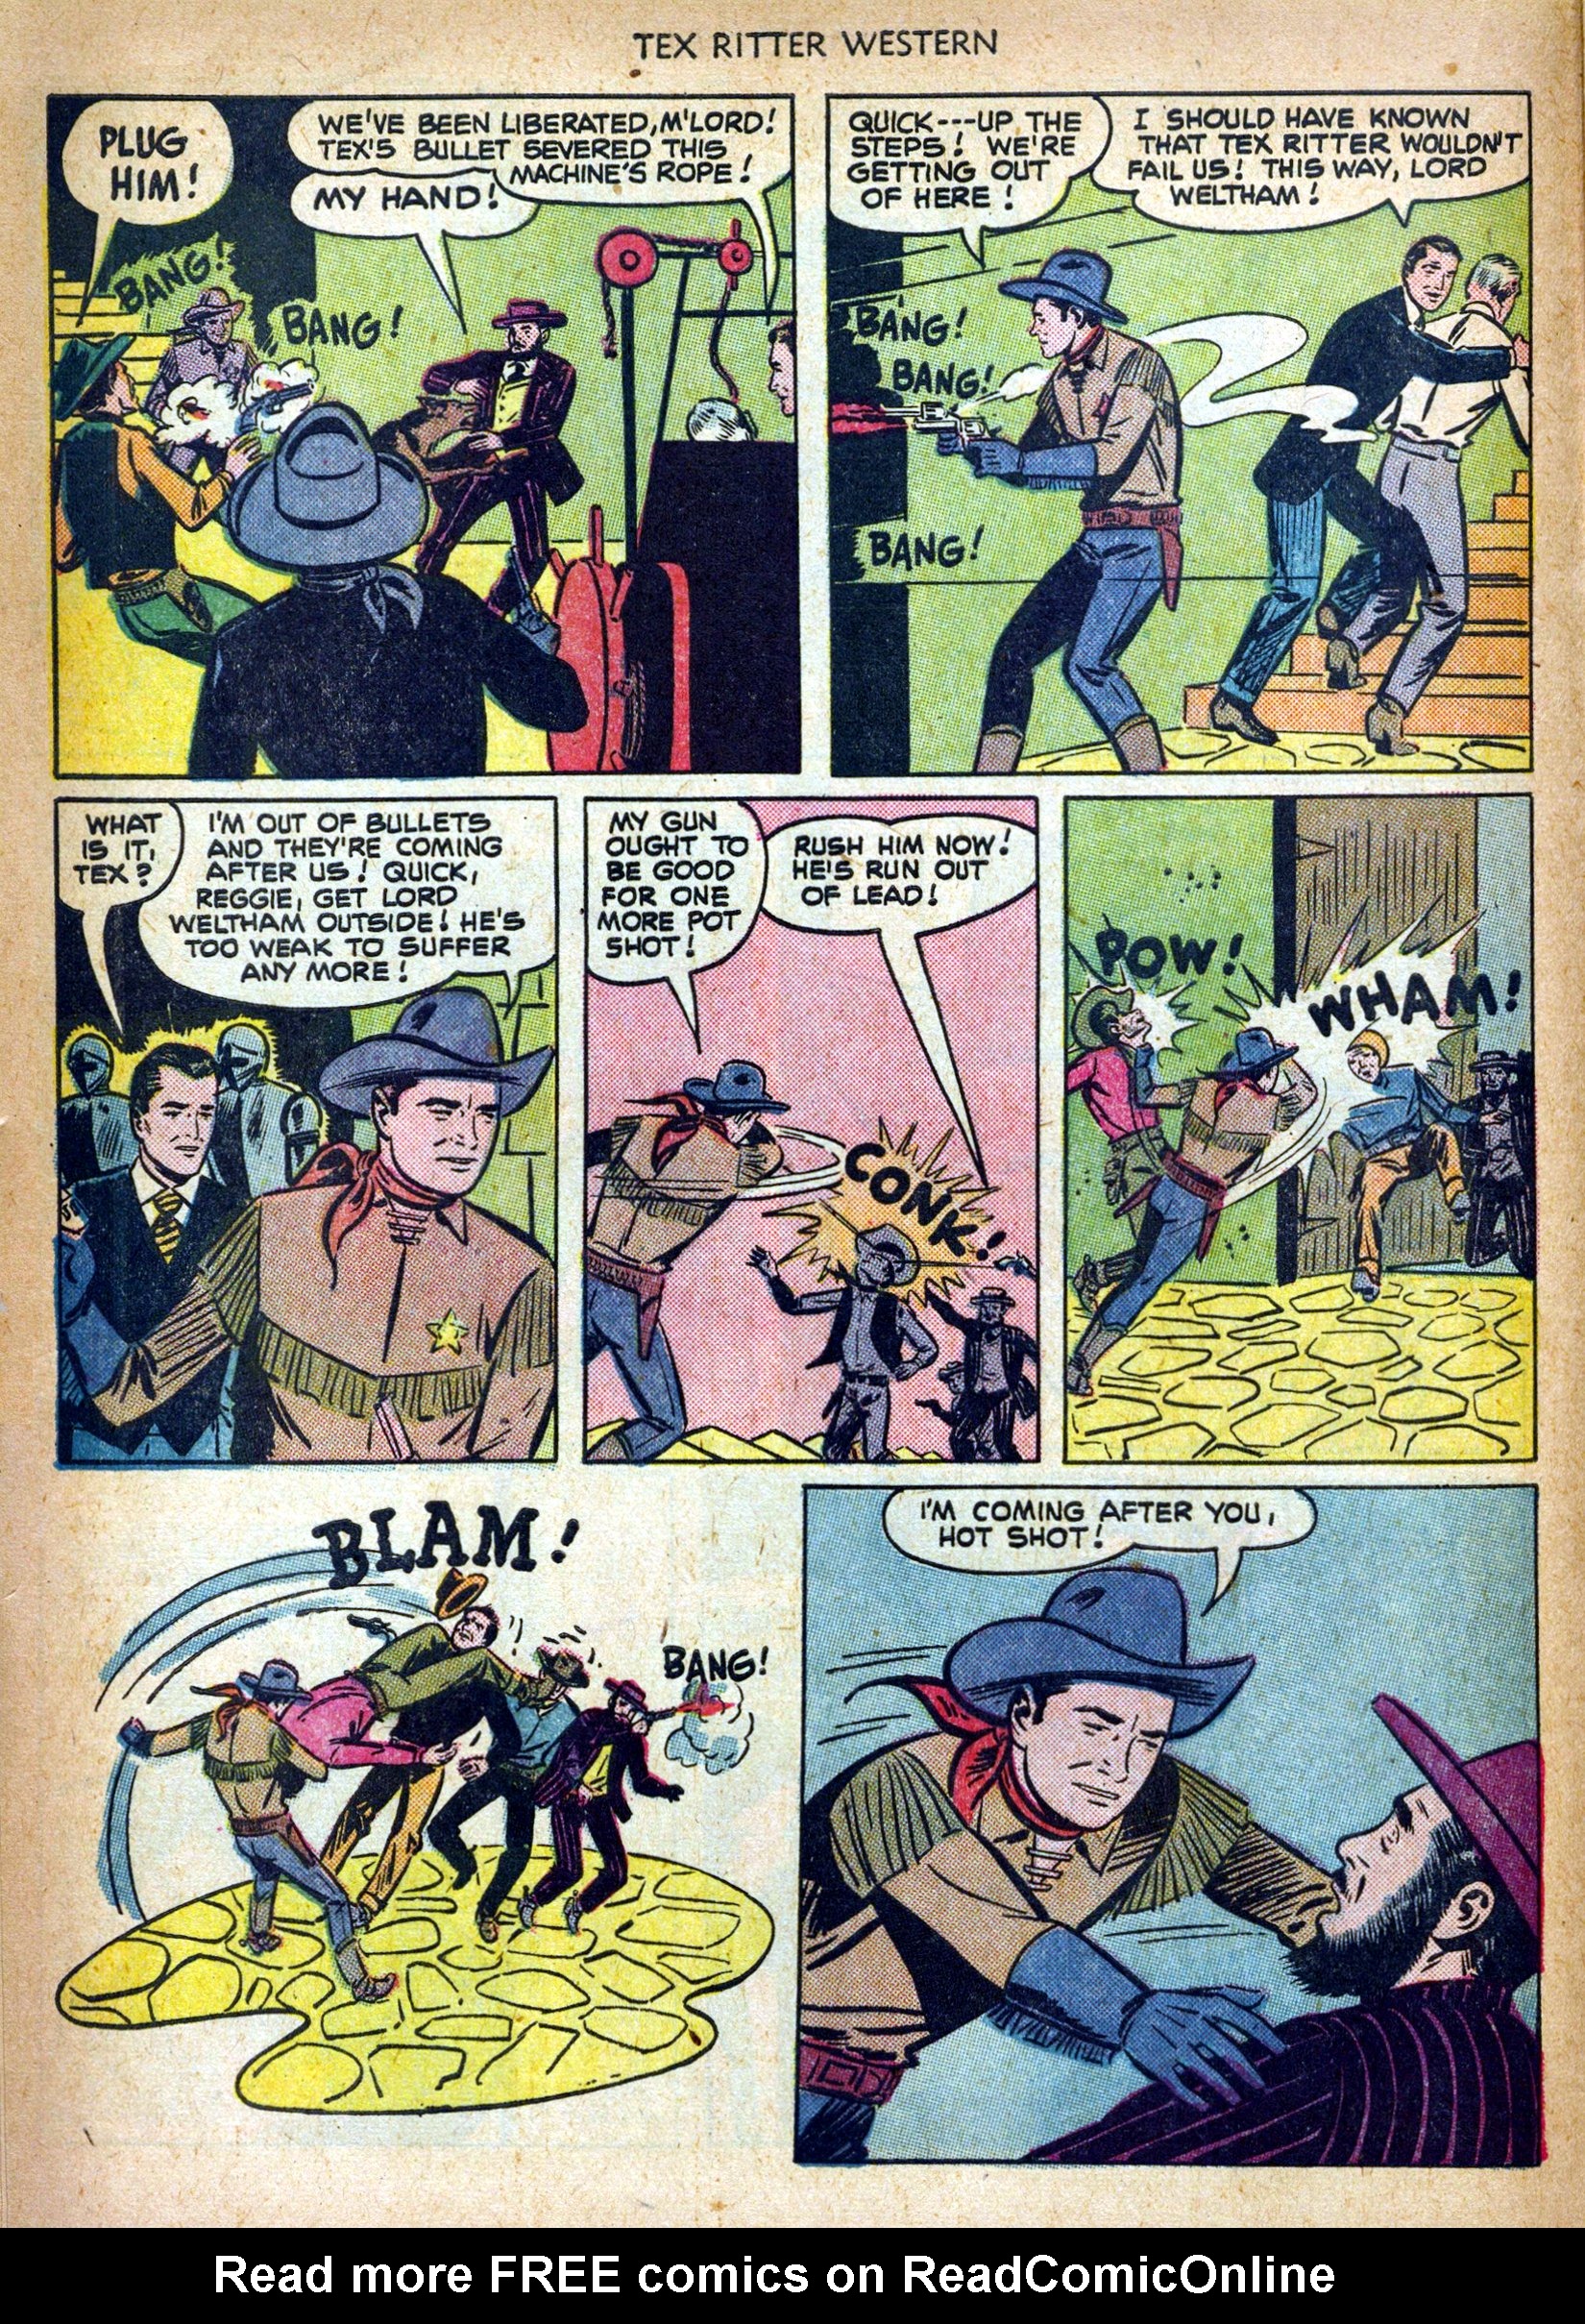 Read online Tex Ritter Western comic -  Issue #6 - 14